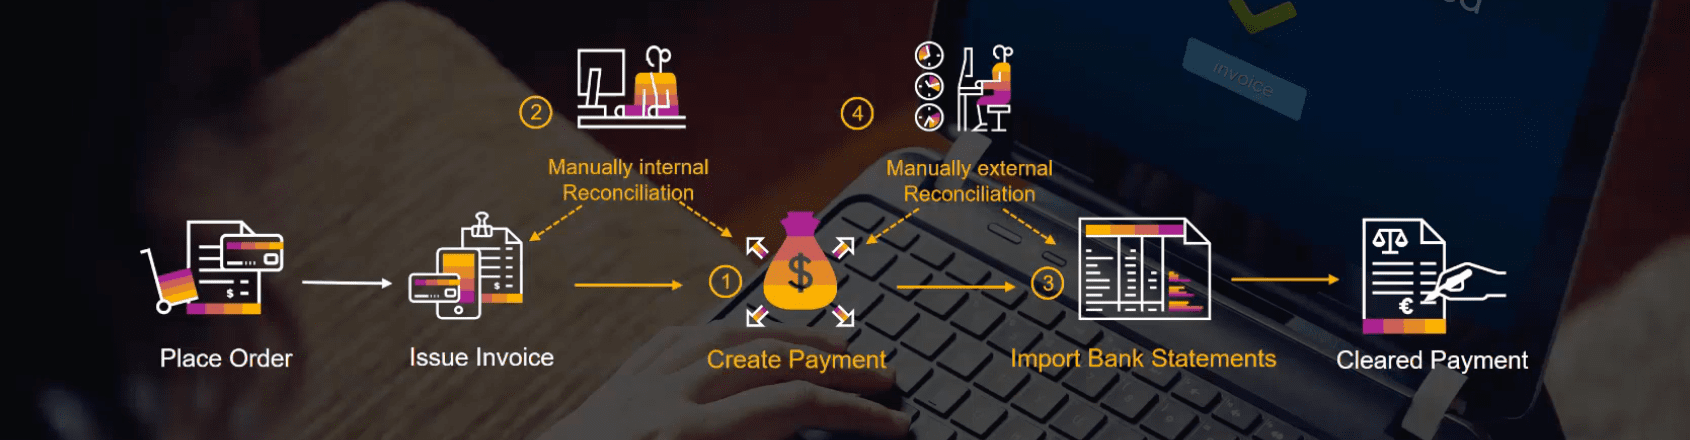 The order-to-cash process in SAP Business One